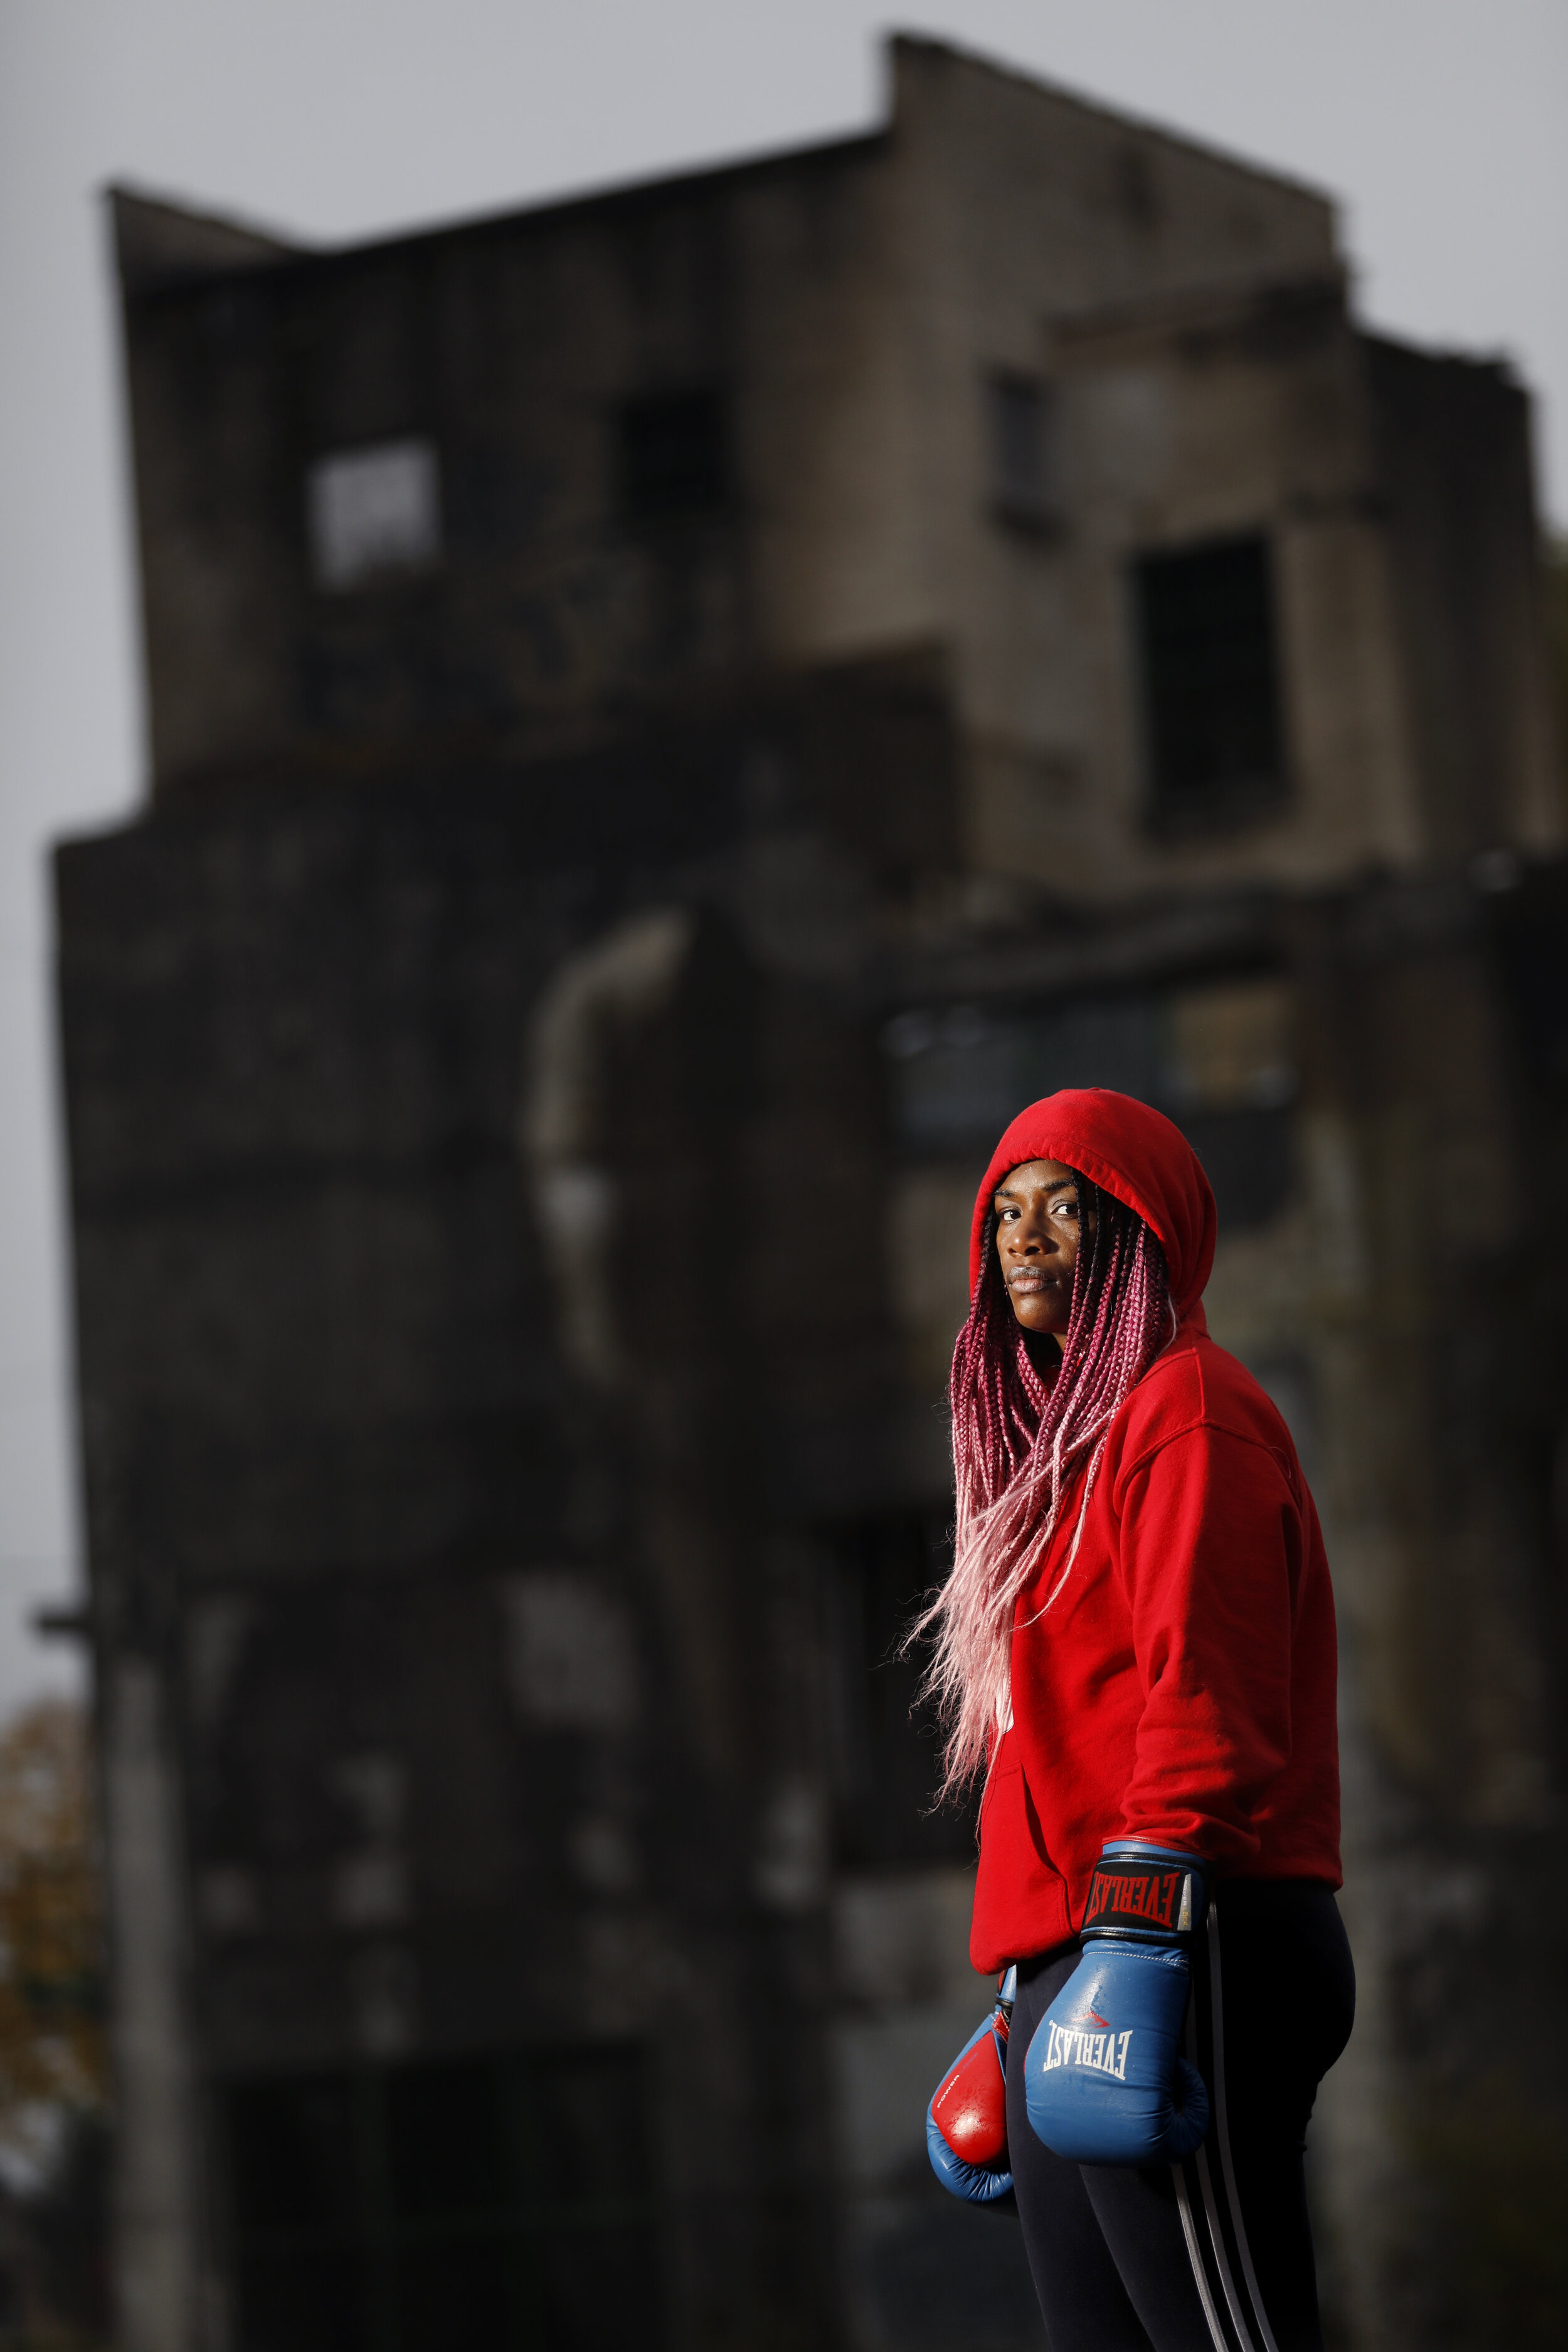  Claressa Shields is photographed in Flint, Michigan. Shields, a world and Olympic boxing champion, speaks to school children regularly. "Sometimes it's hard for kids because they want to fit in and they want to be accepted by their peers. But when y